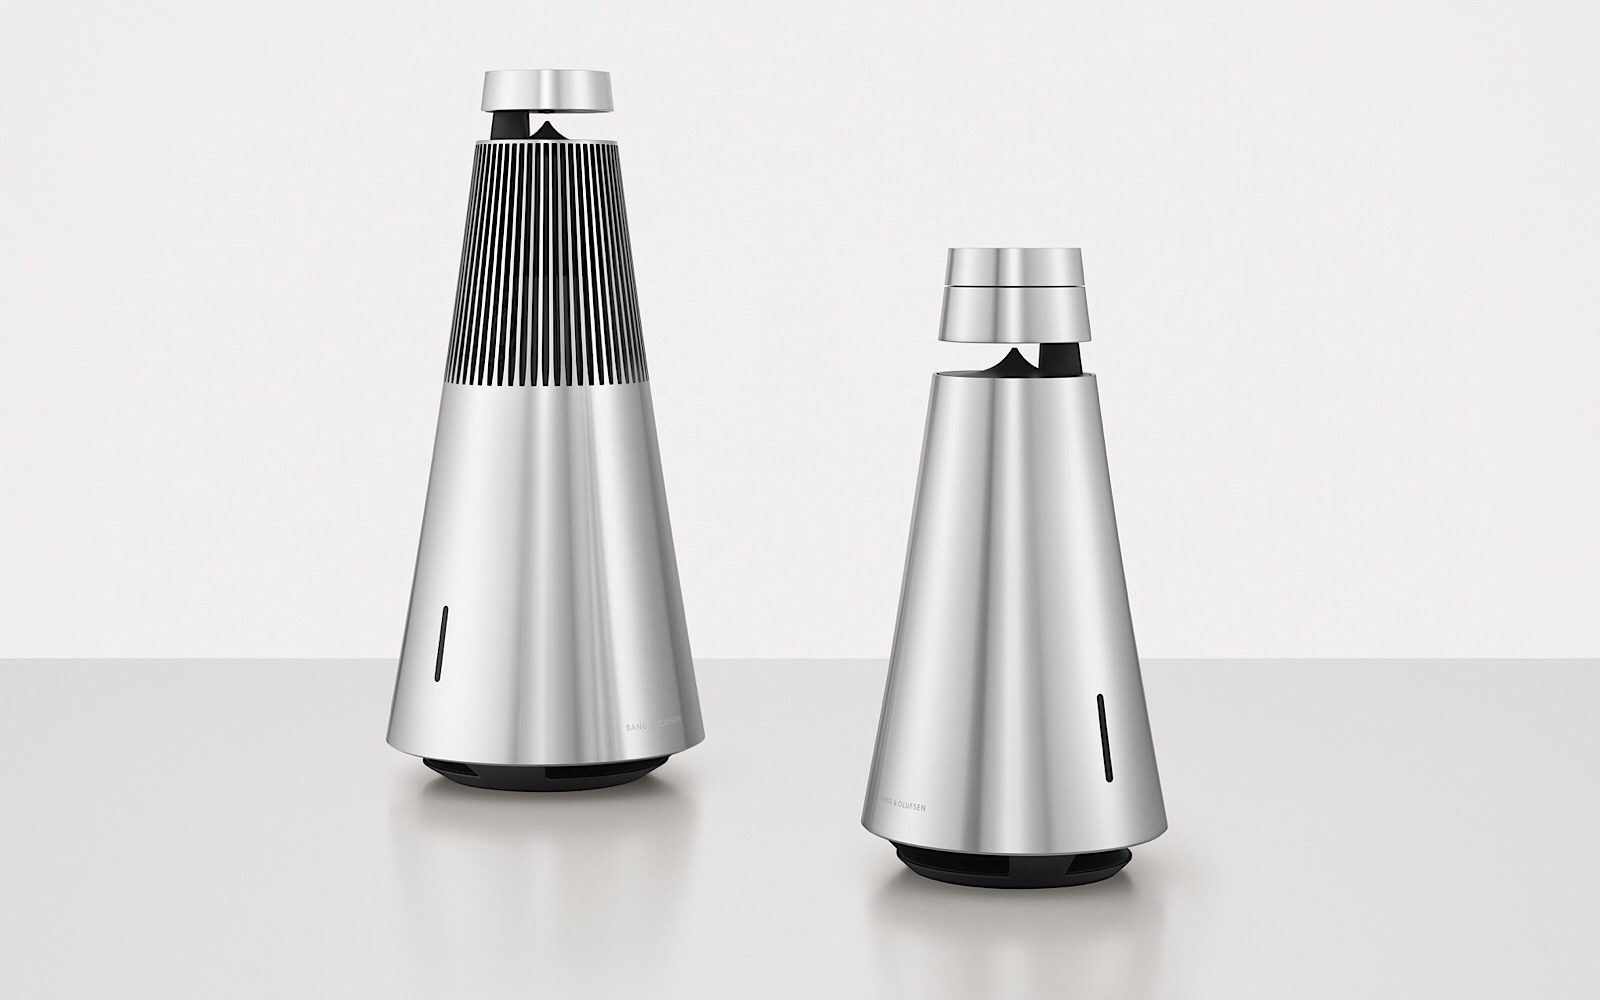 Bang & Olufsen's BeoSound 2 and BeoSound 1 gain AirPlay 2 support this year with multiroom